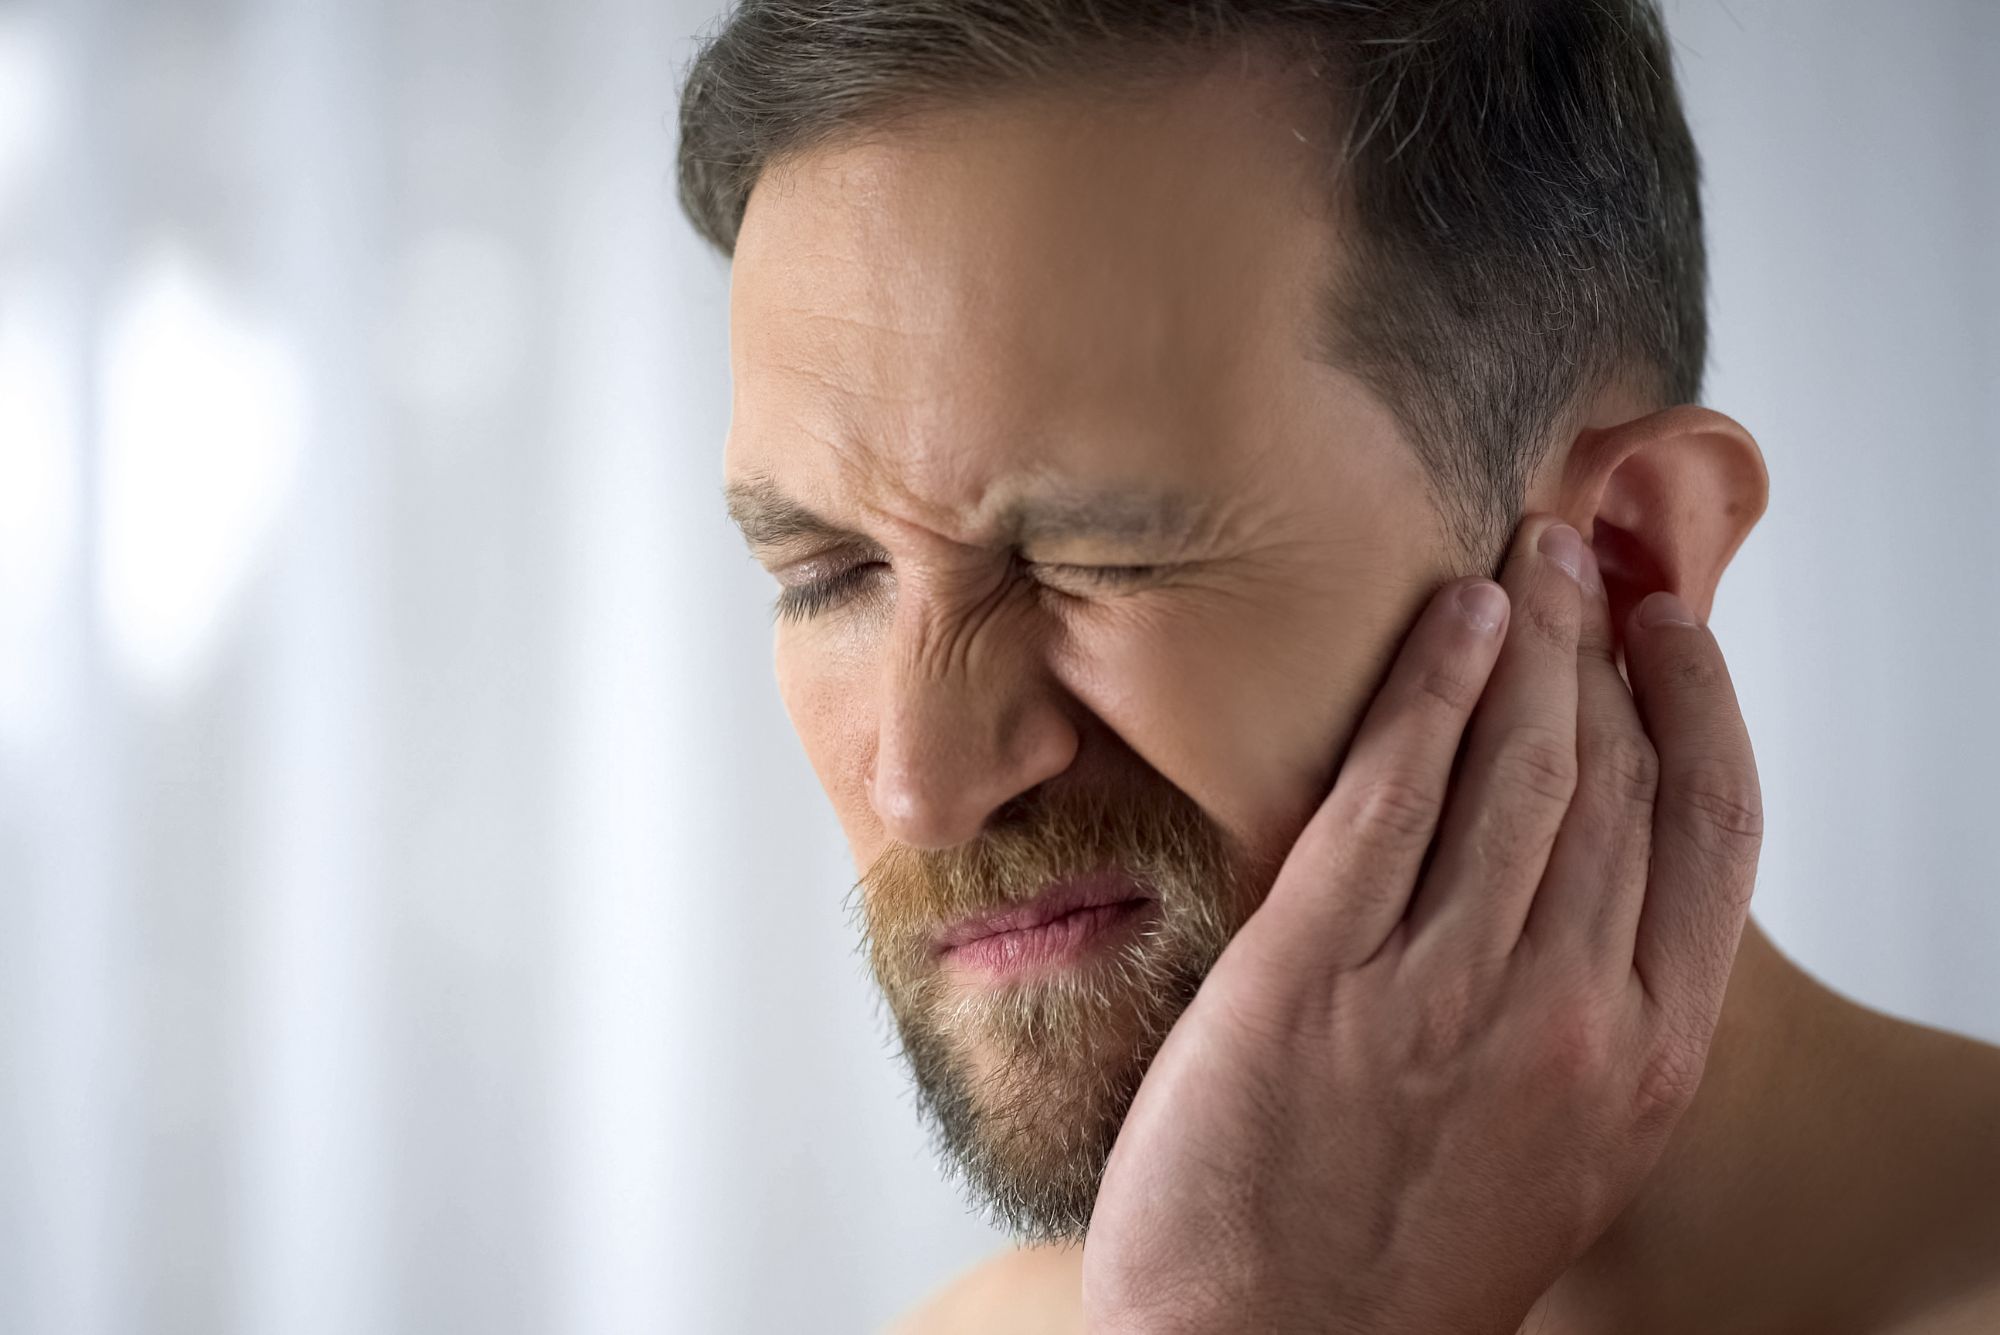 A man holds his ear while experiencing sudden hearing loss in one ear.